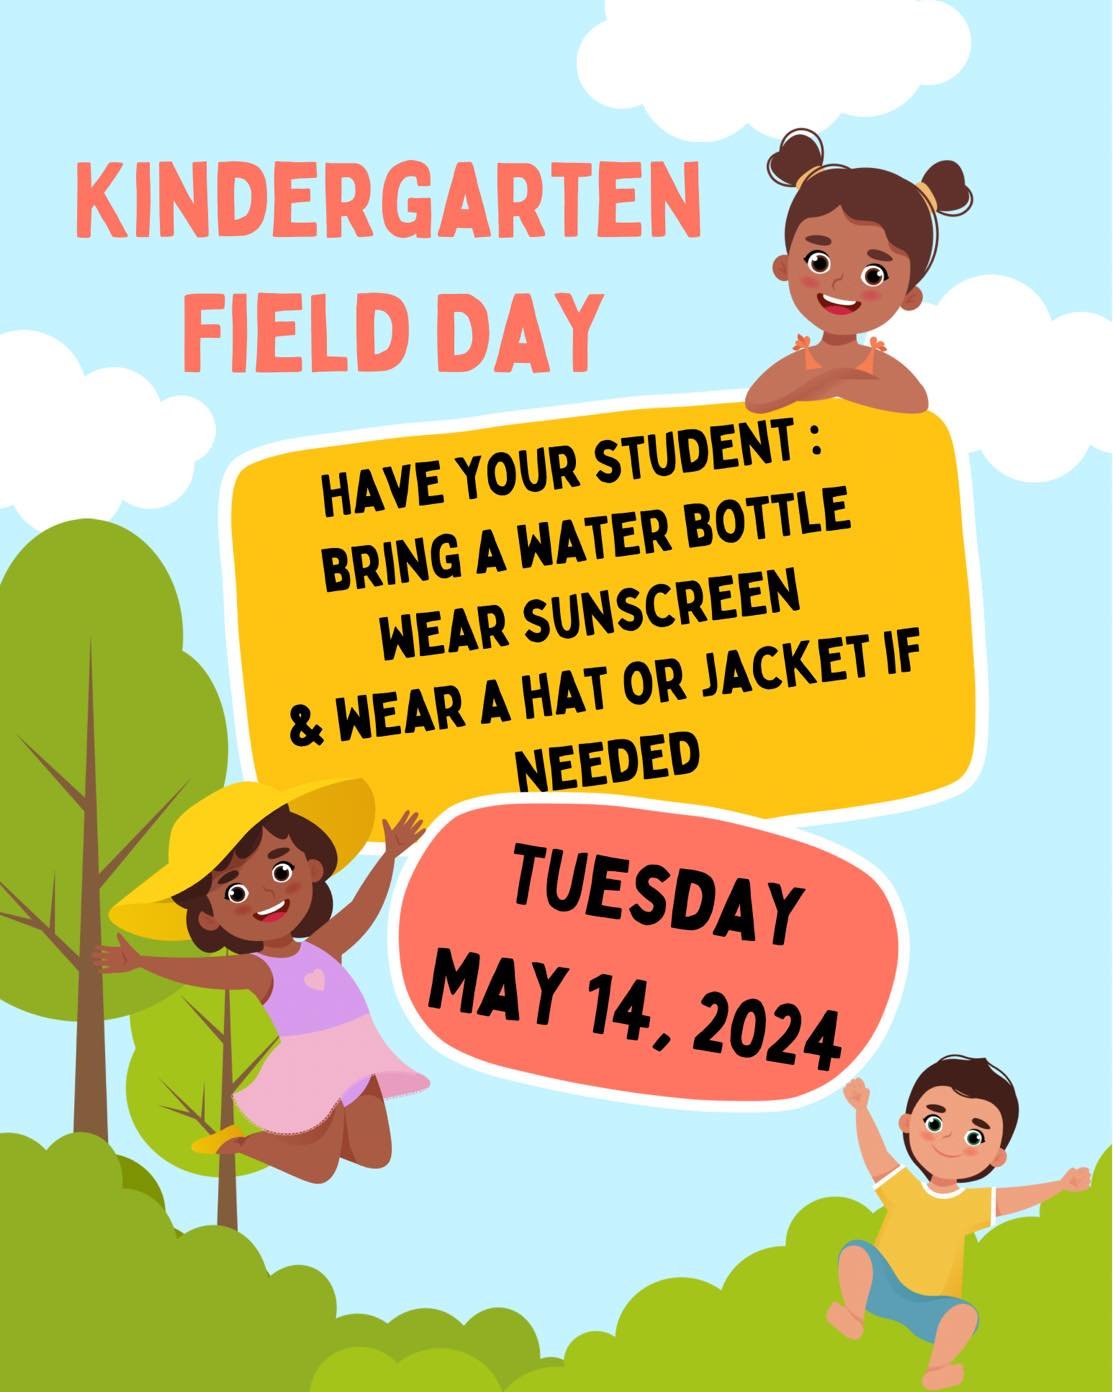 🛝 Kindergarten Field Day is (tomorrow) Tuesday, May 14th! 
(Grades 1-6 will be on May 29th)